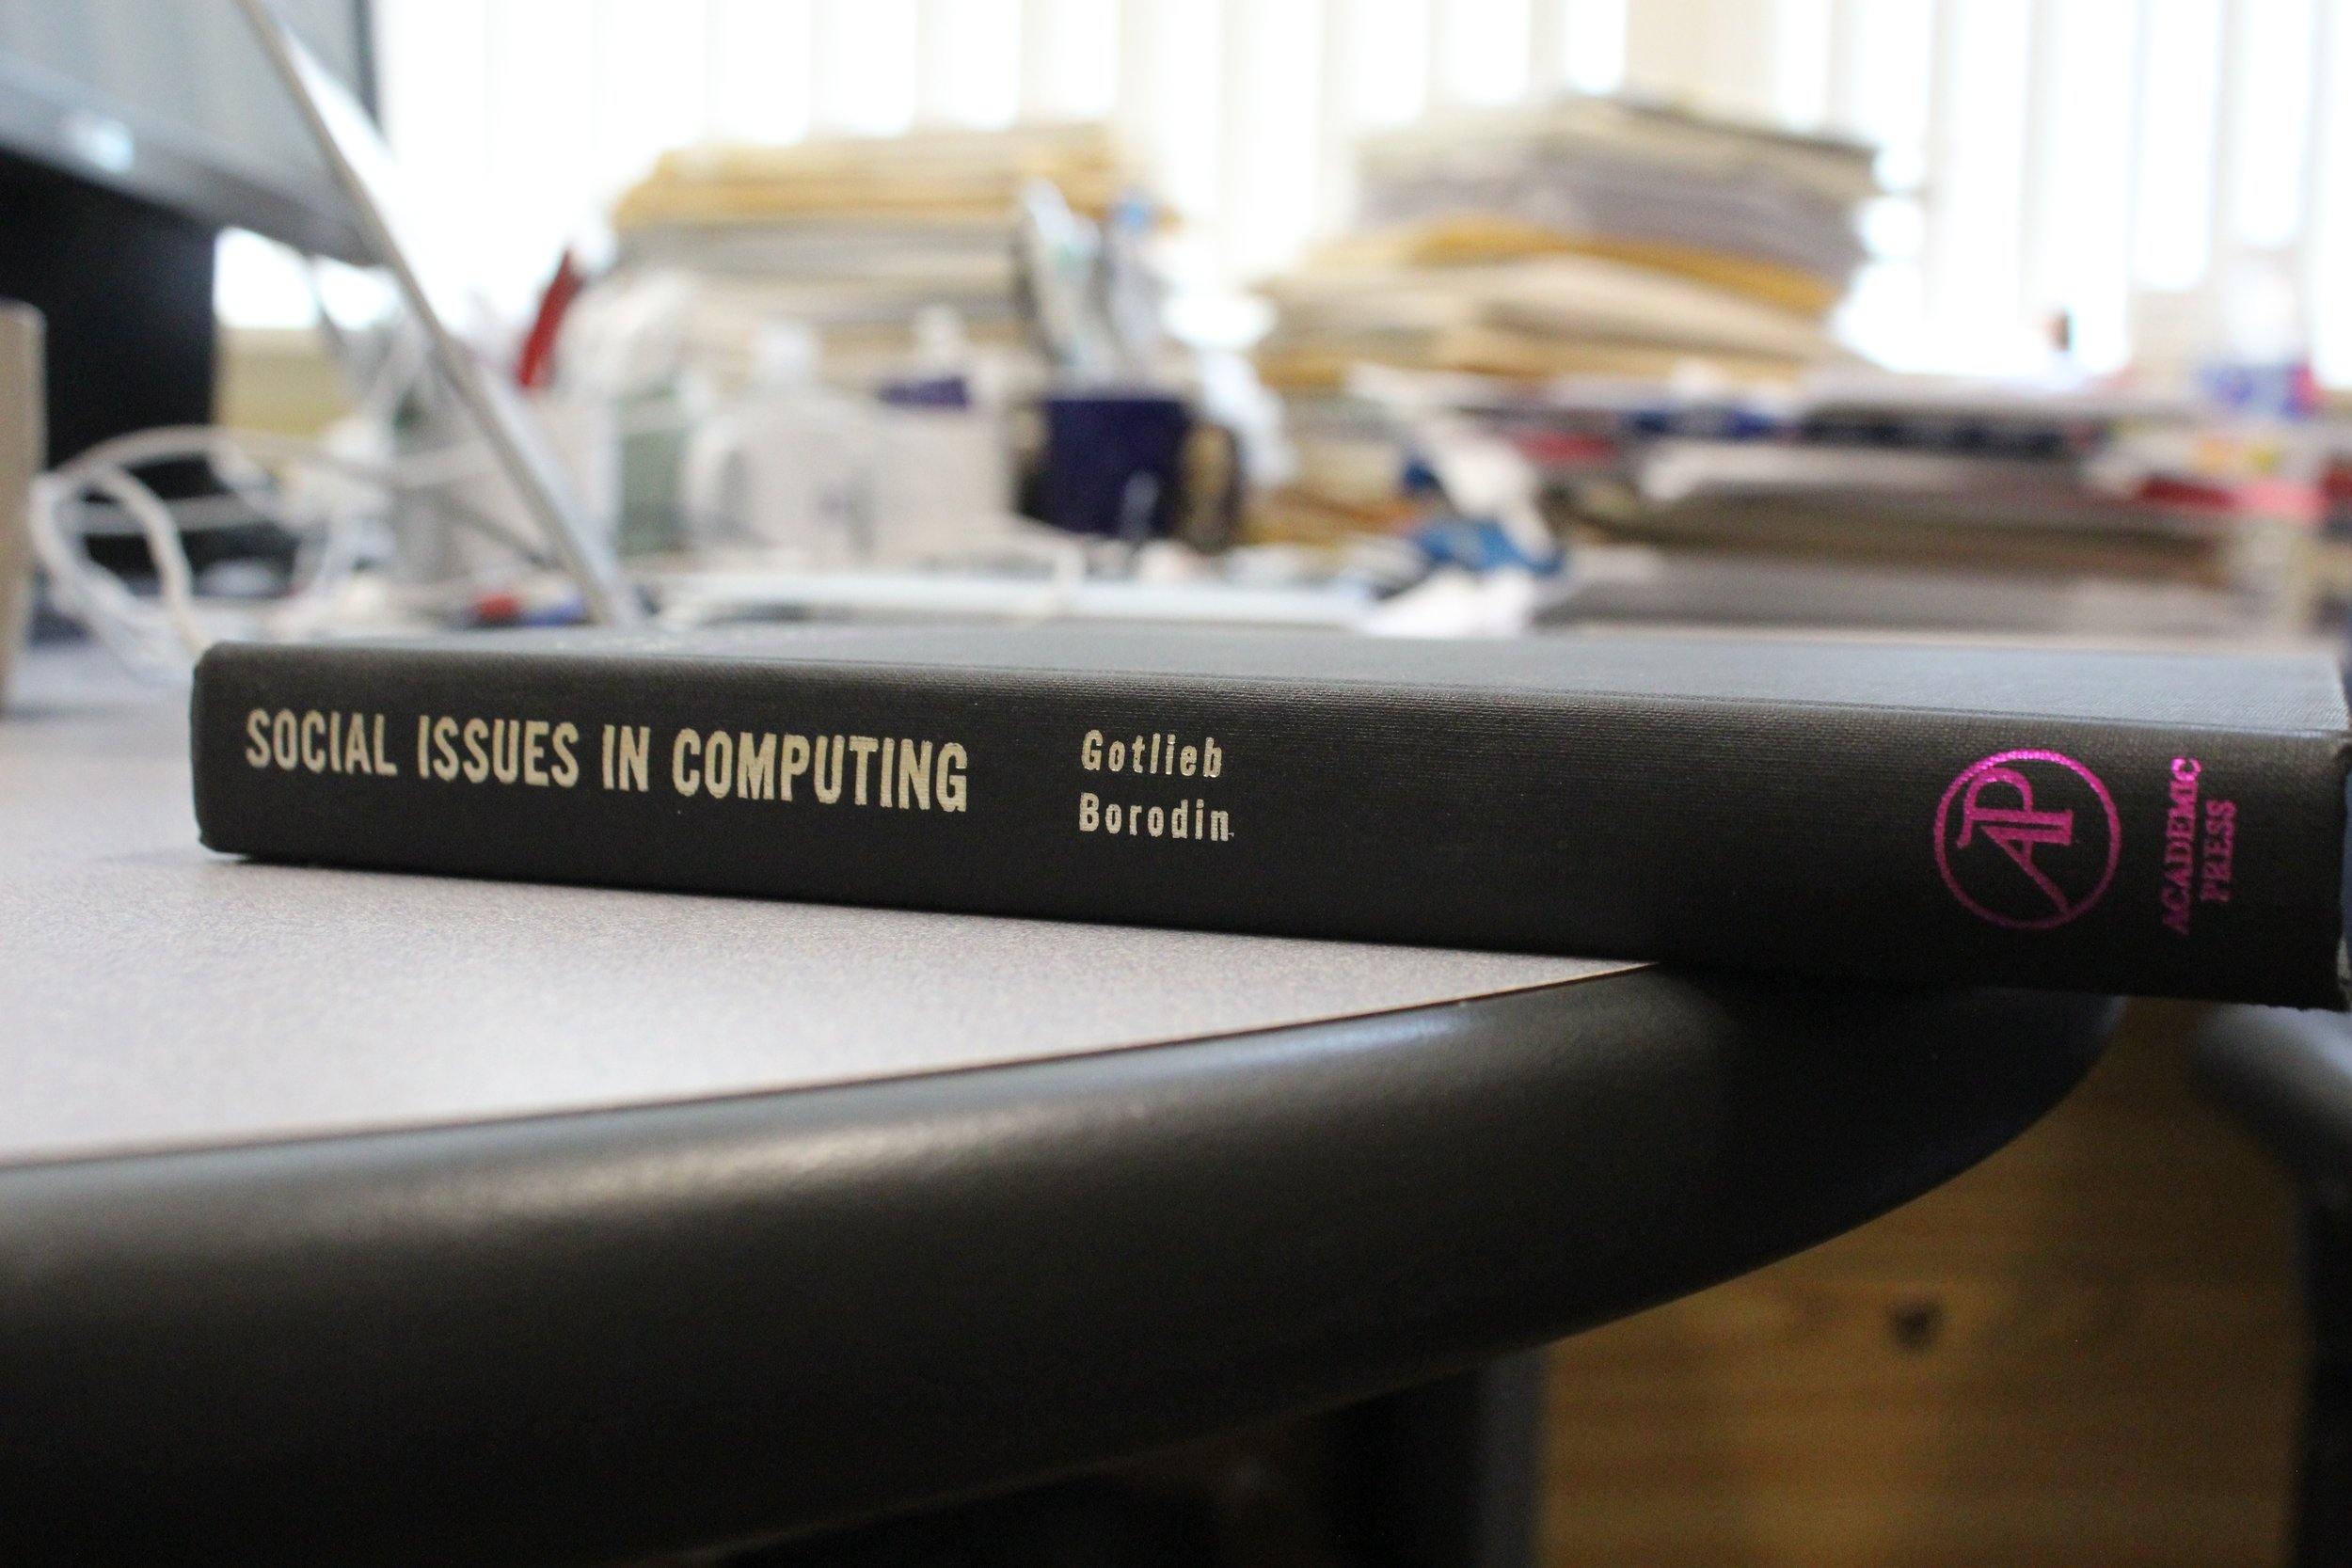 Social Issues in Computing book on a desk in an office.